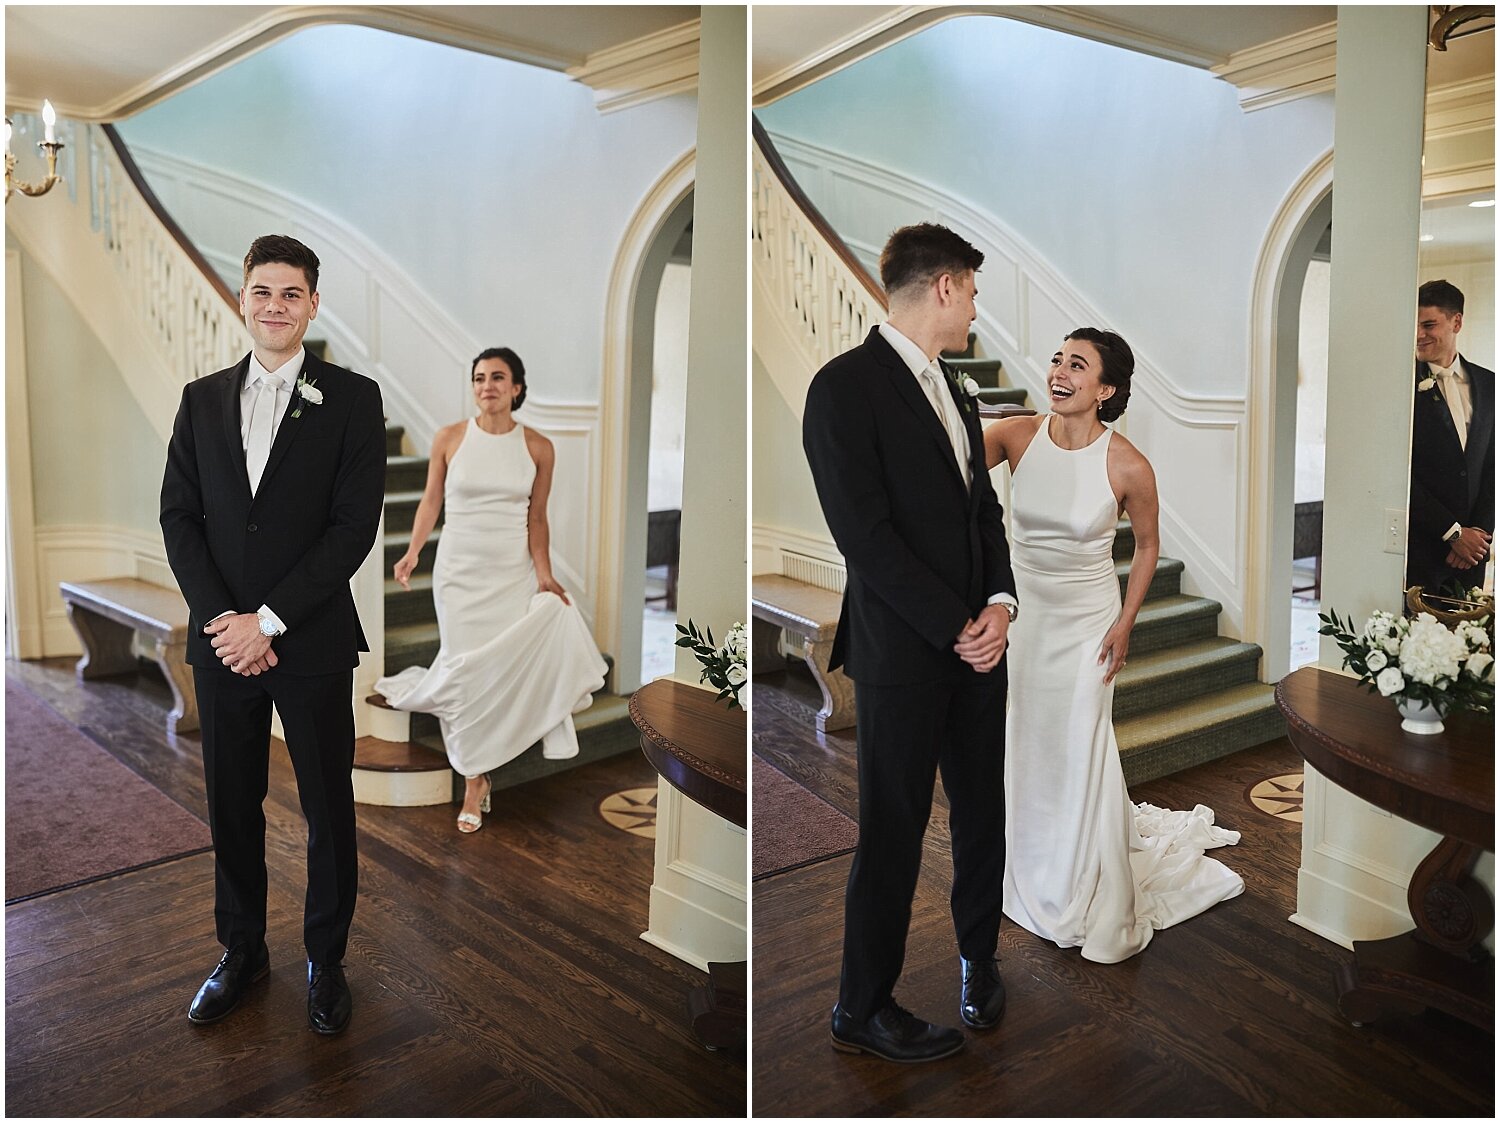  bride and groom’s first looks 